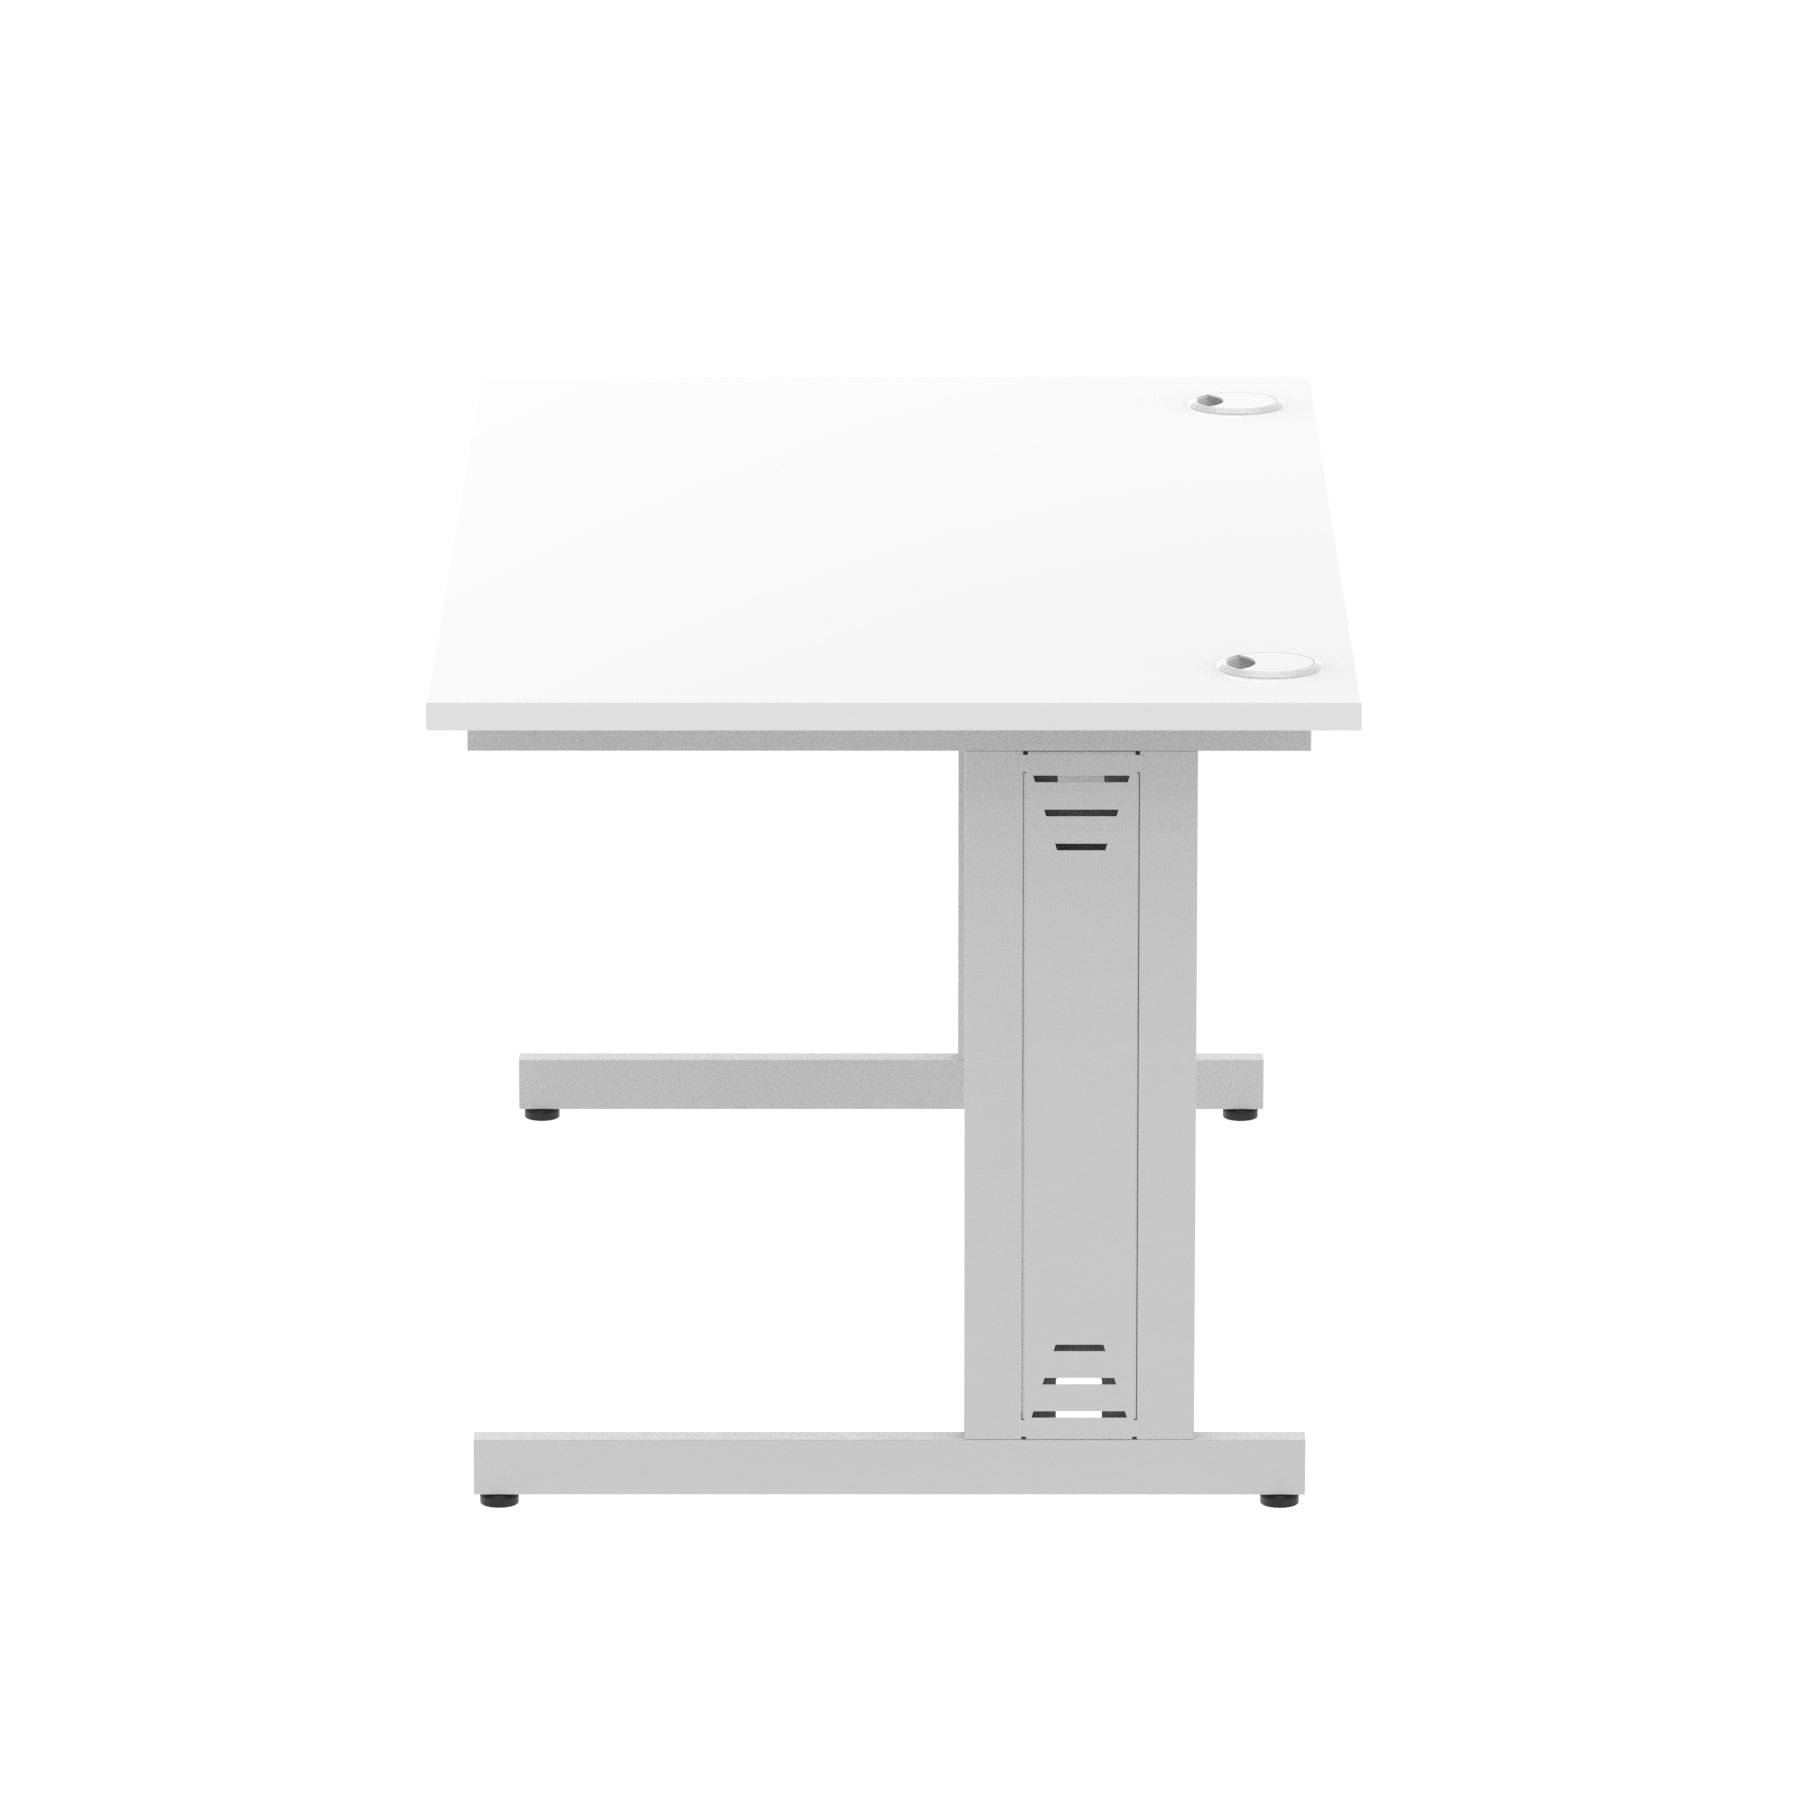 Impulse 1400mm Straight Desk with Cable Managed Leg - MFC Rectangular Table, 5-Year Guarantee, Self-Assembly, 1400x800mm Top, Silver/White Frame